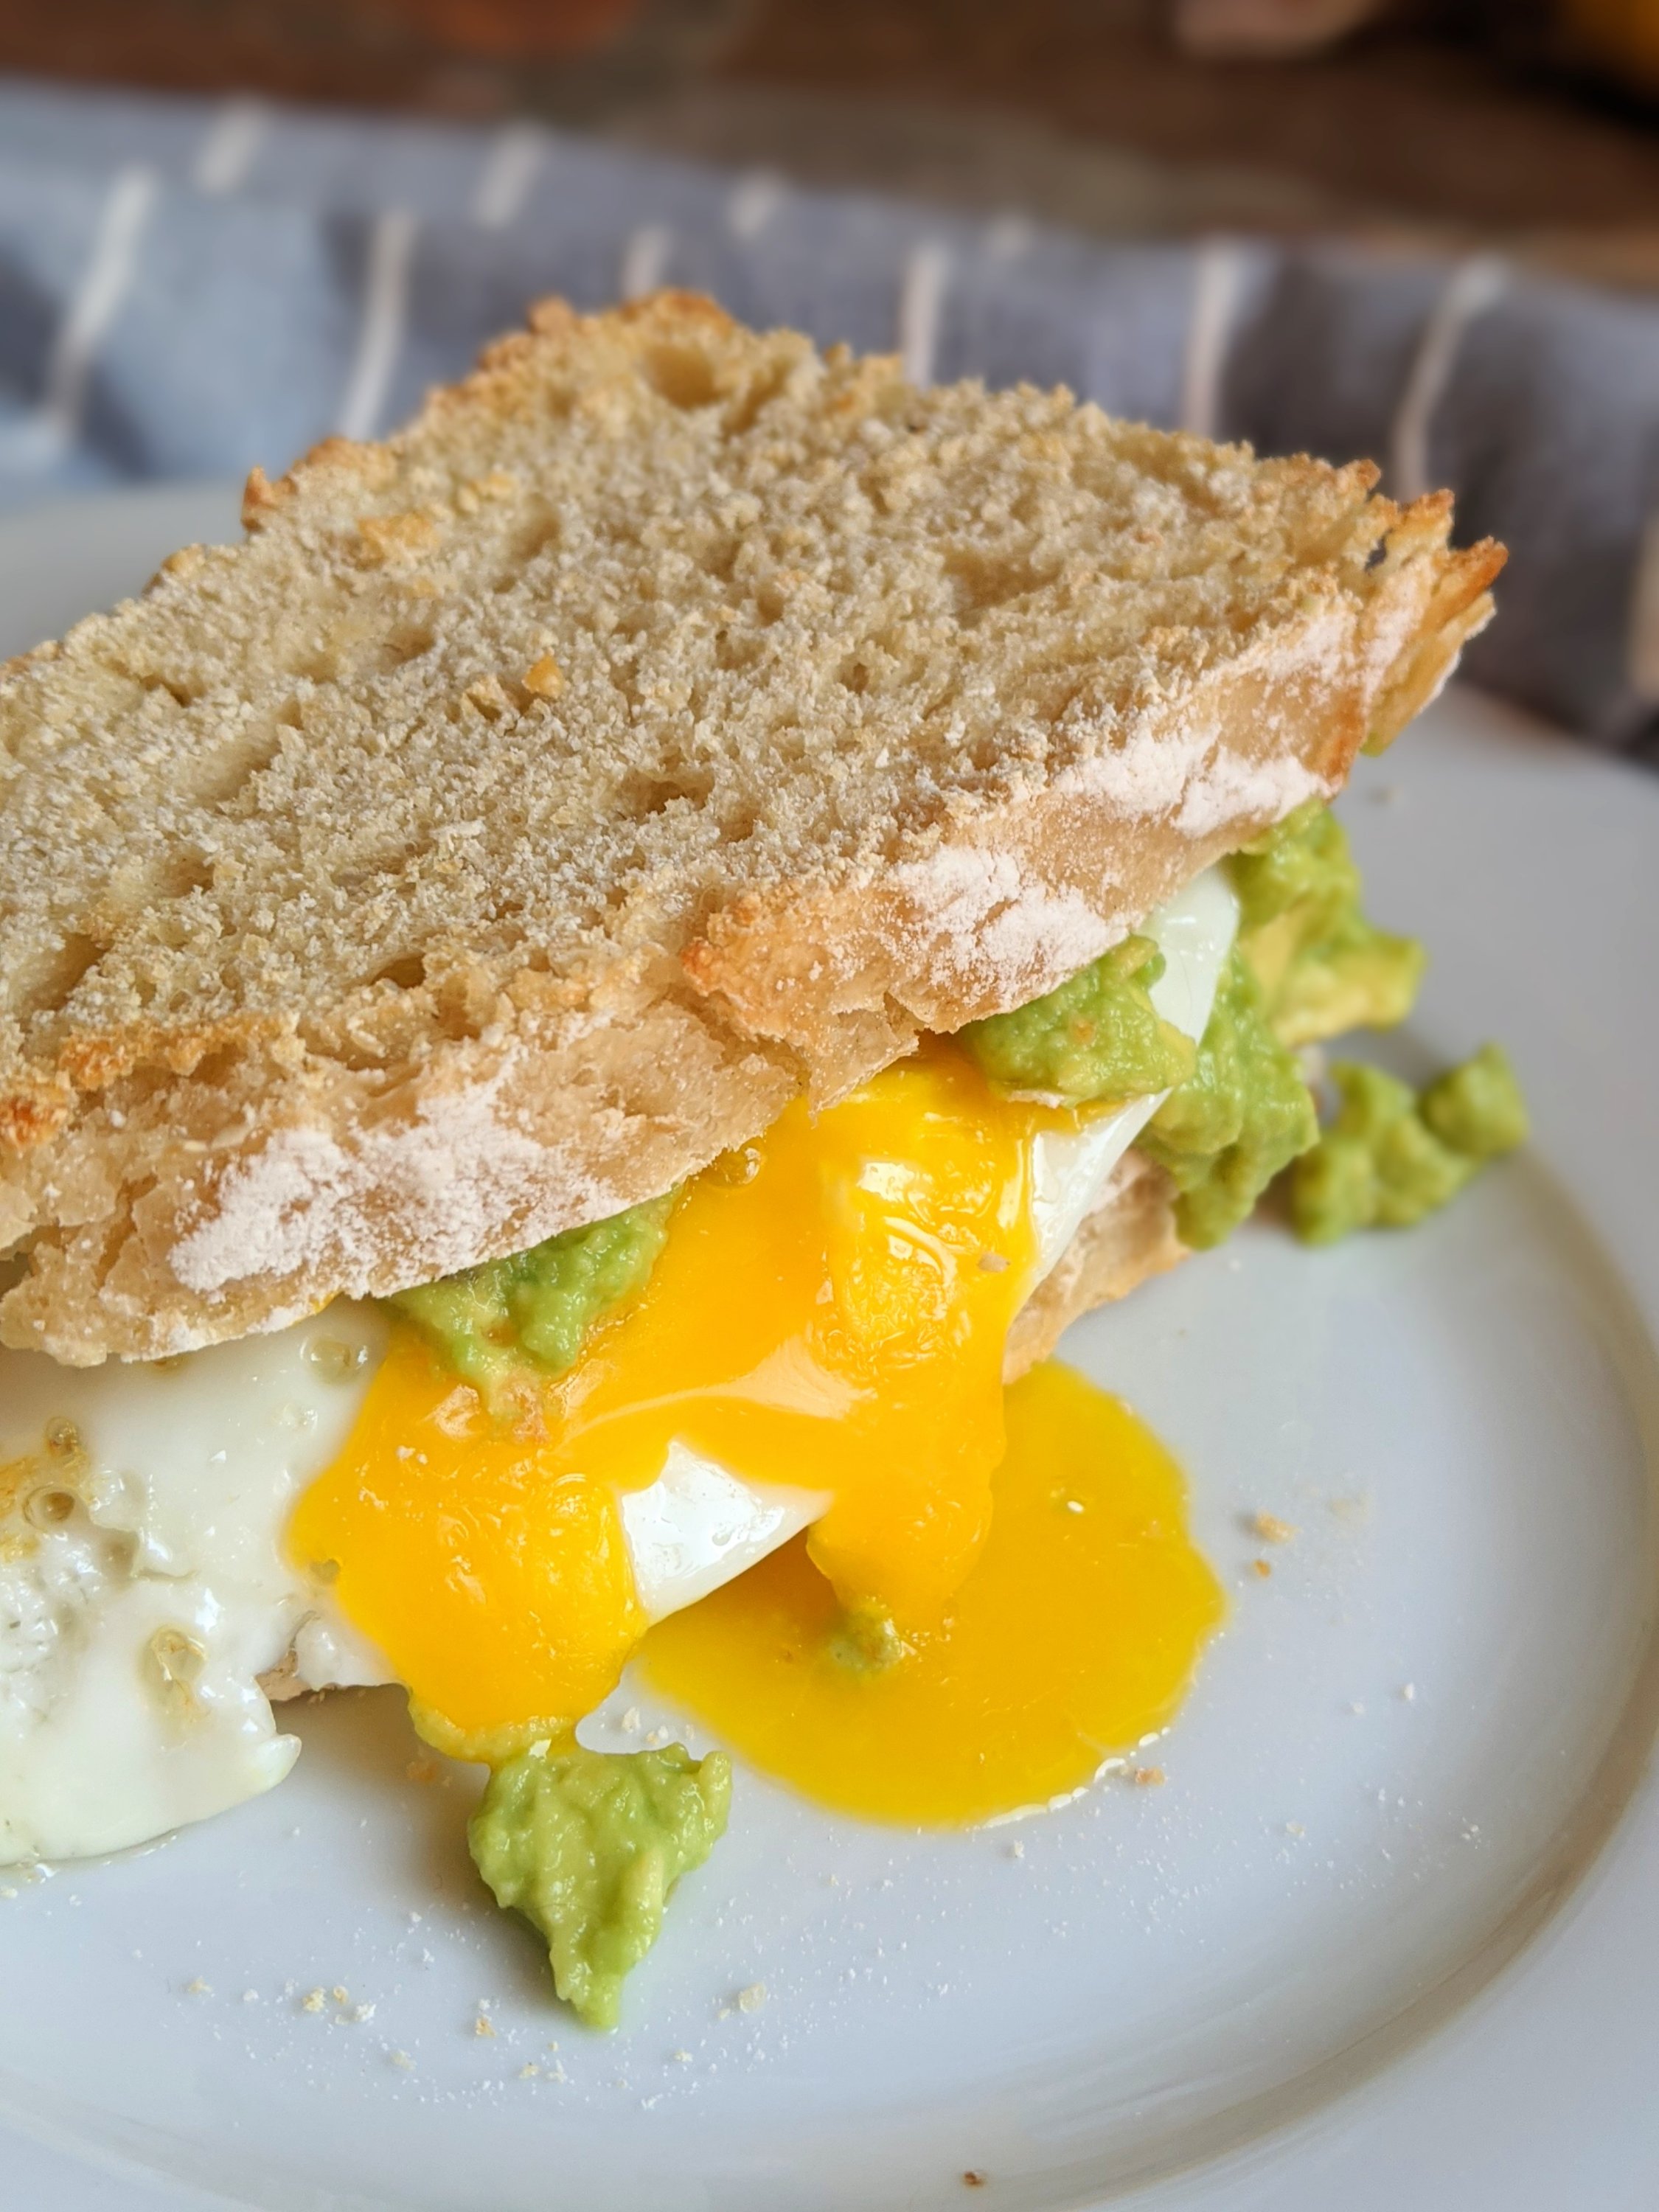 breakfast egg sandwich with avocado recipe healthy homeamde bruch ideas for a crowd entertaining potluck brunch recipes everyone will love